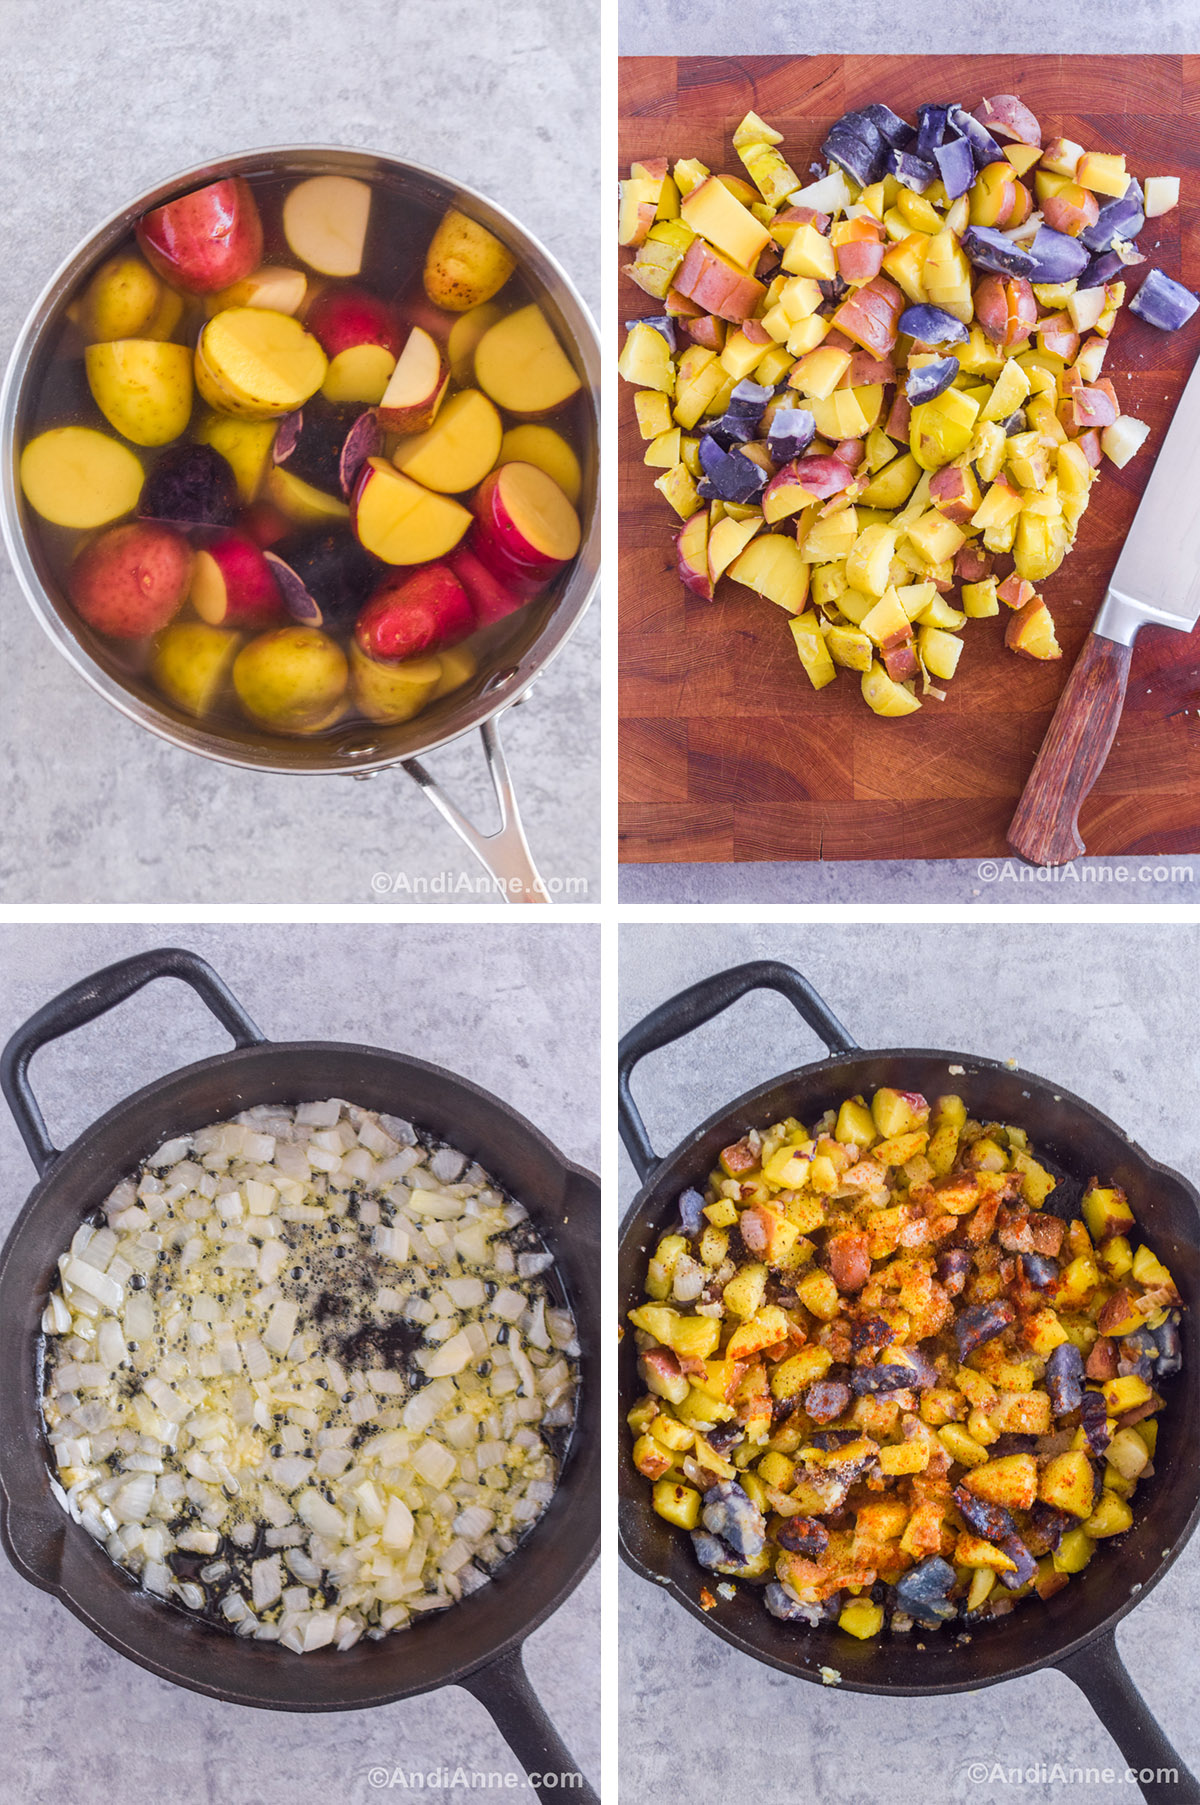 Four images showing steps to make the recipe. First is a pot with chopped potatoes in water. Second is chopped potatoes on a cutting board with a knife. Third is a skillet with chopped onion in butter. Fourth is hash browns in a skillet sprinkled with paprika.